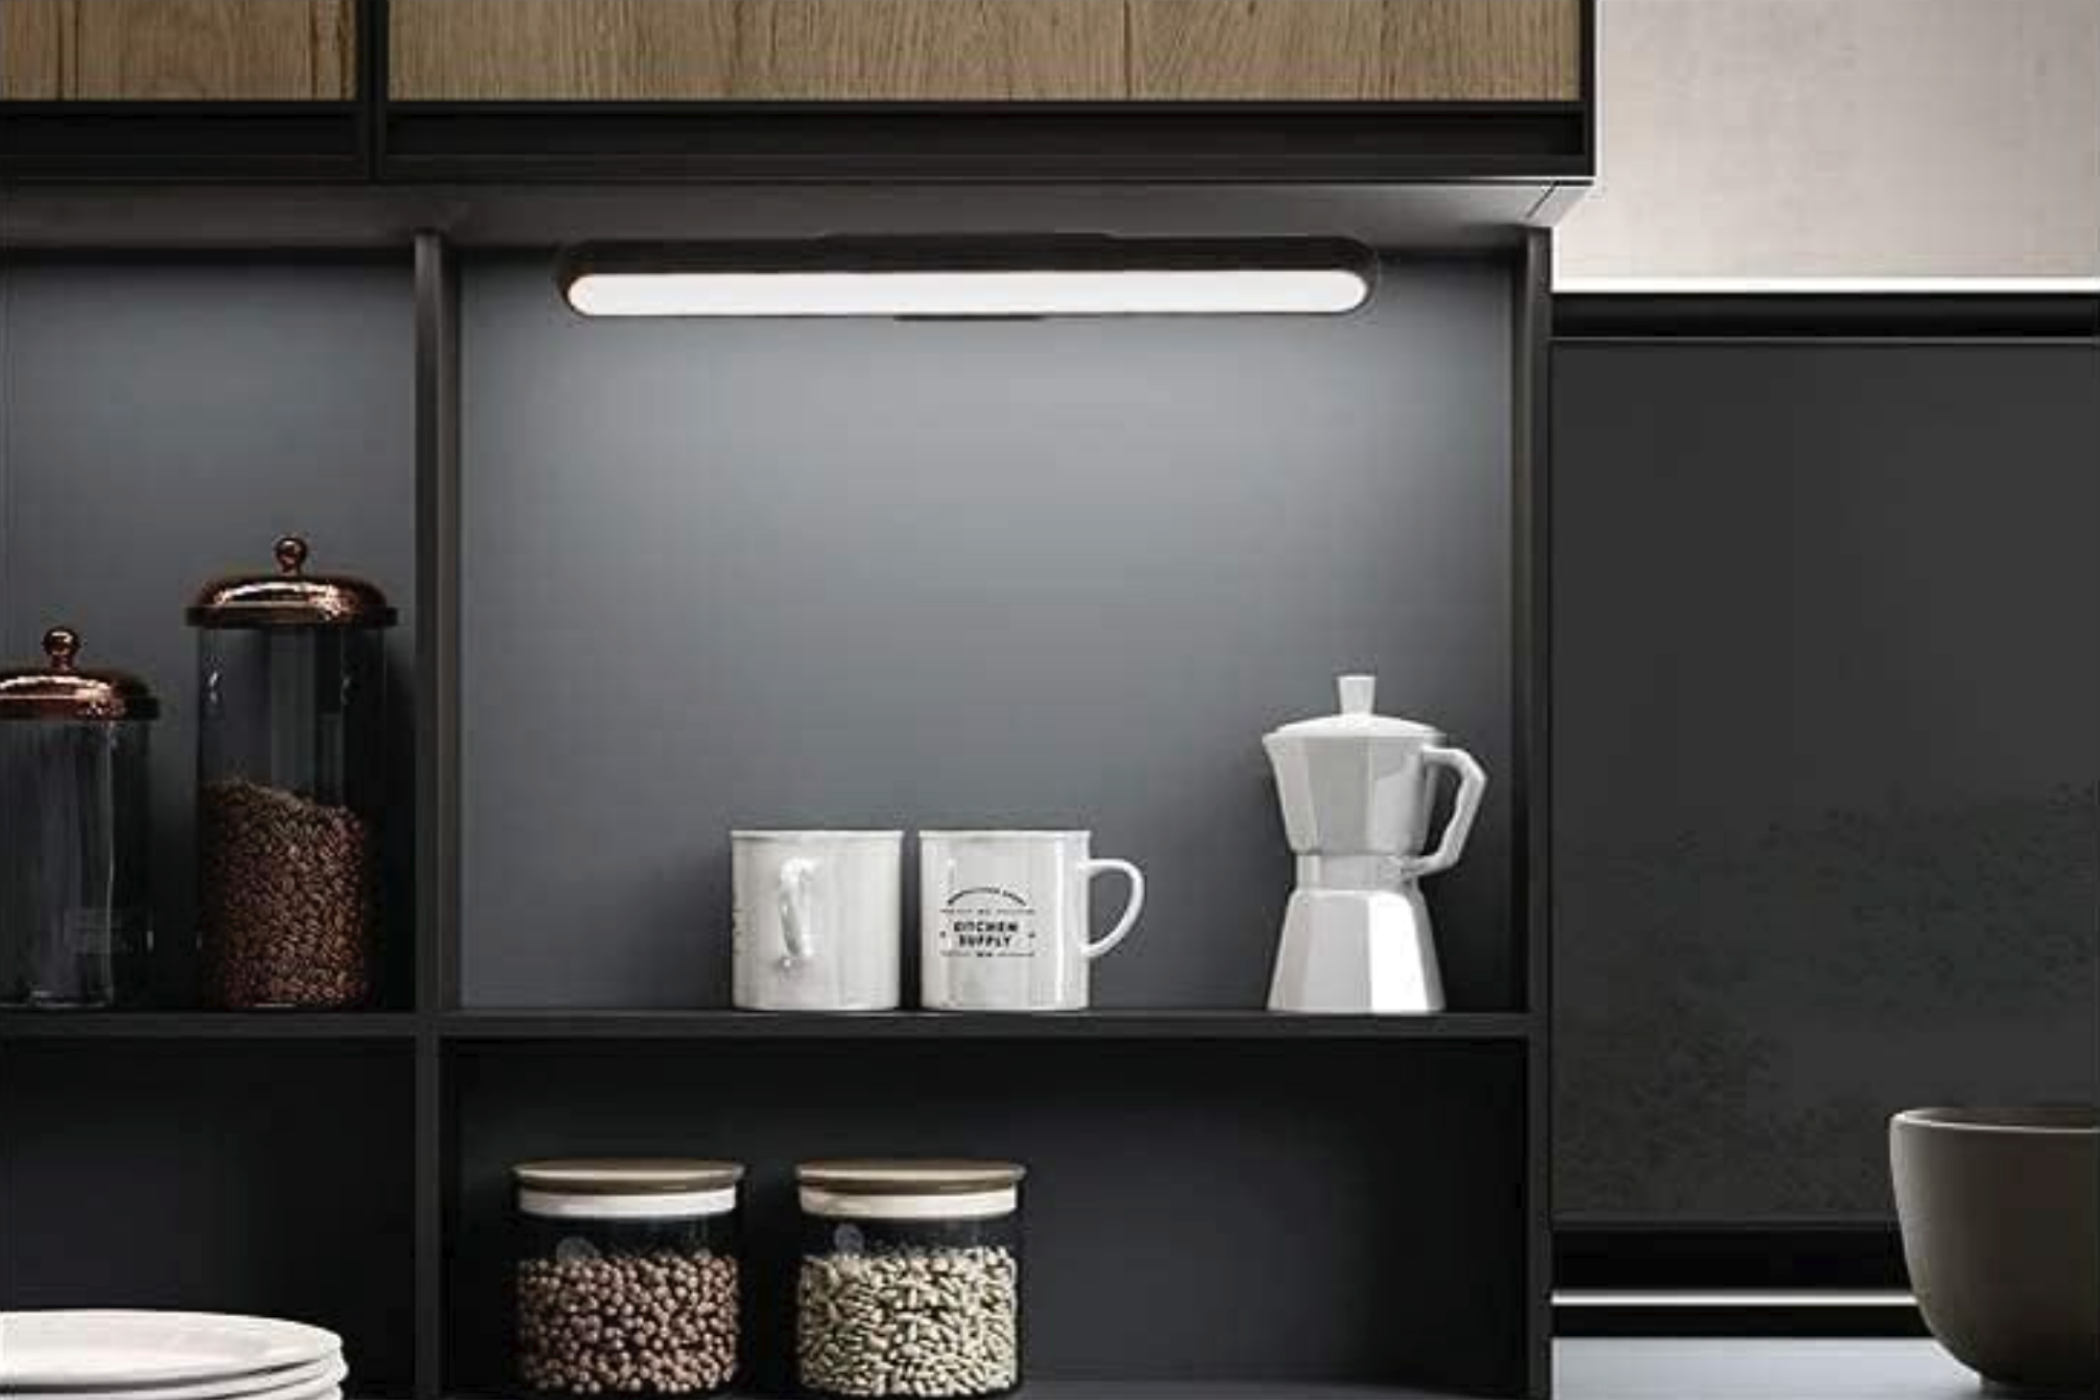 A WILLED Light Bar being used in a kitchen cabinet